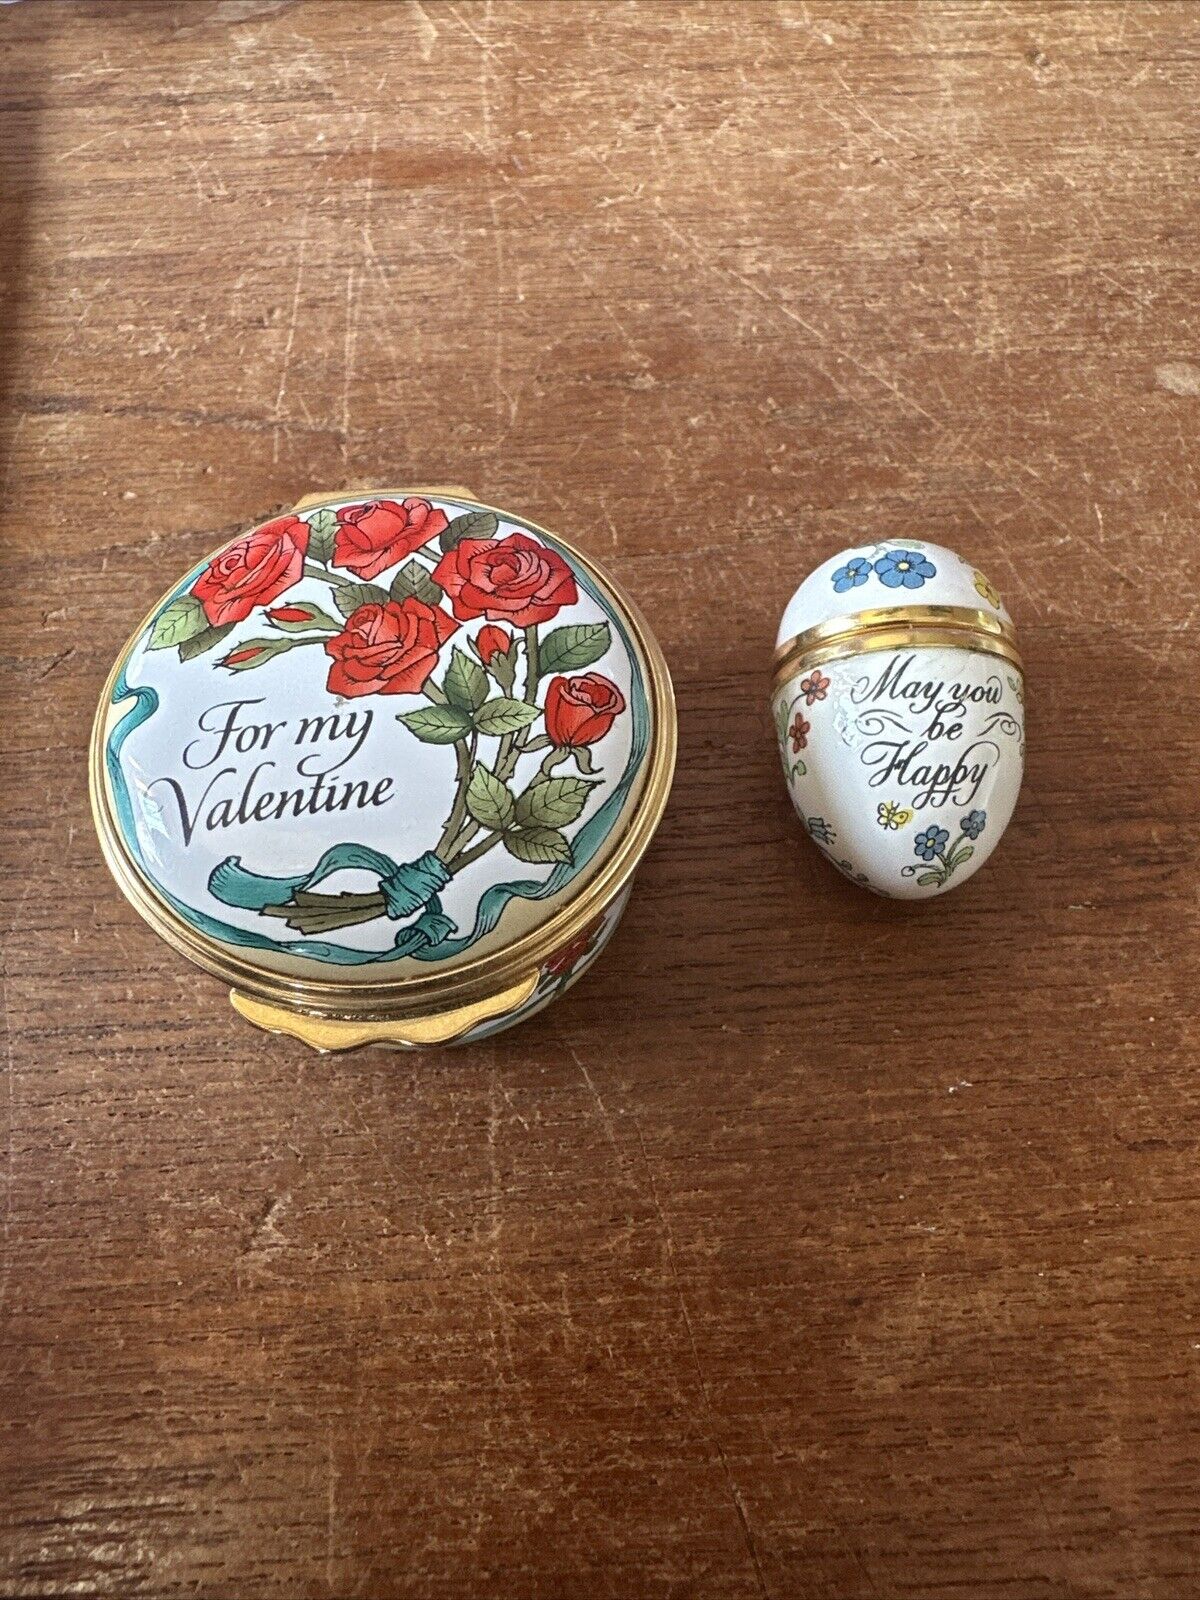 Halcyon Days Enamels Trinket Box \'For My Valentine\' & \'May you be Happy\'